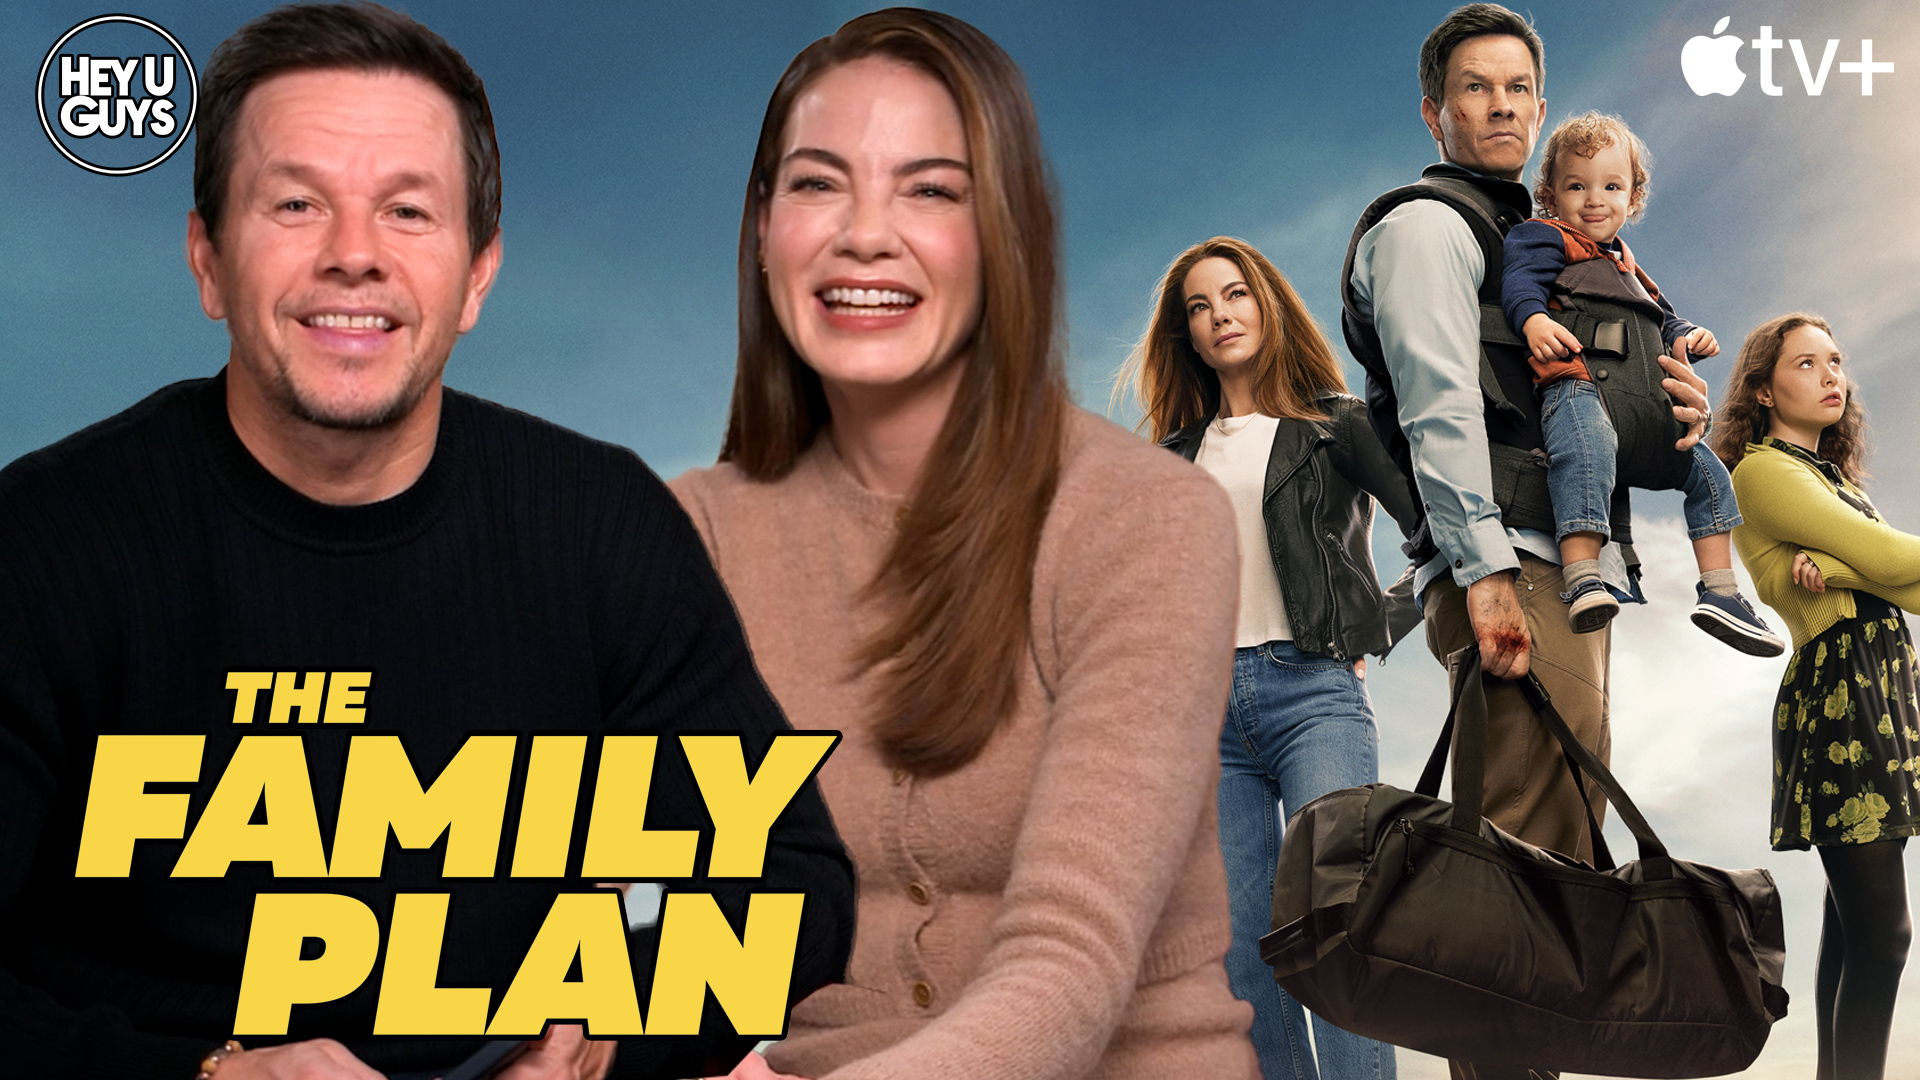 Mark-Wahlberg-&-Michelle-Monaghan---The-Family-Plan